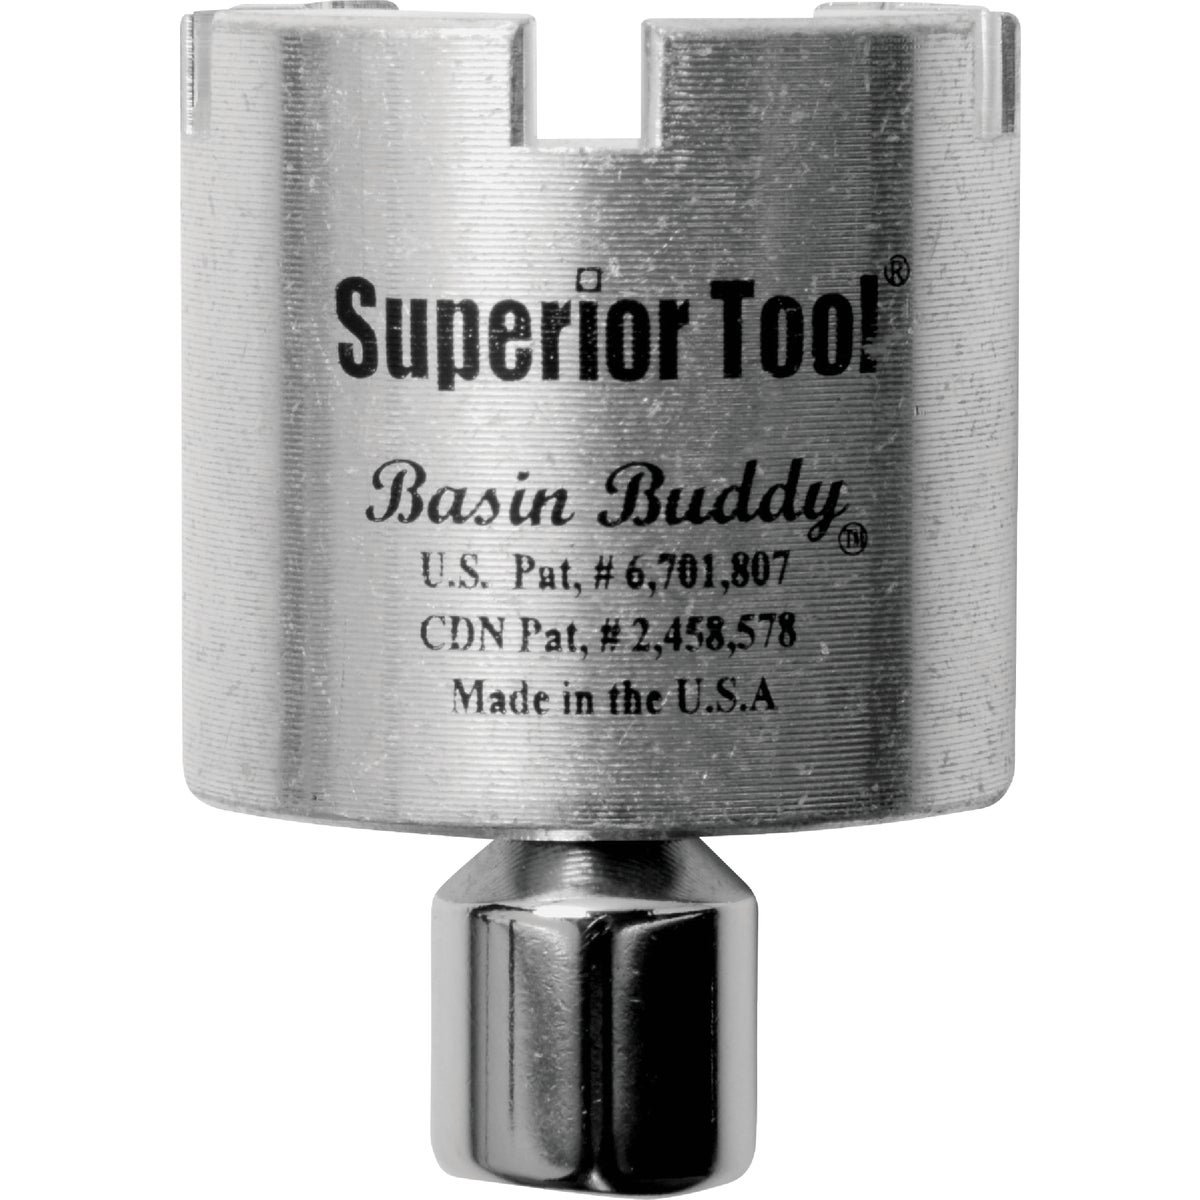 Item 462972, Universal faucet nut wrench fits most metal locknuts, coupling nuts, PVC (